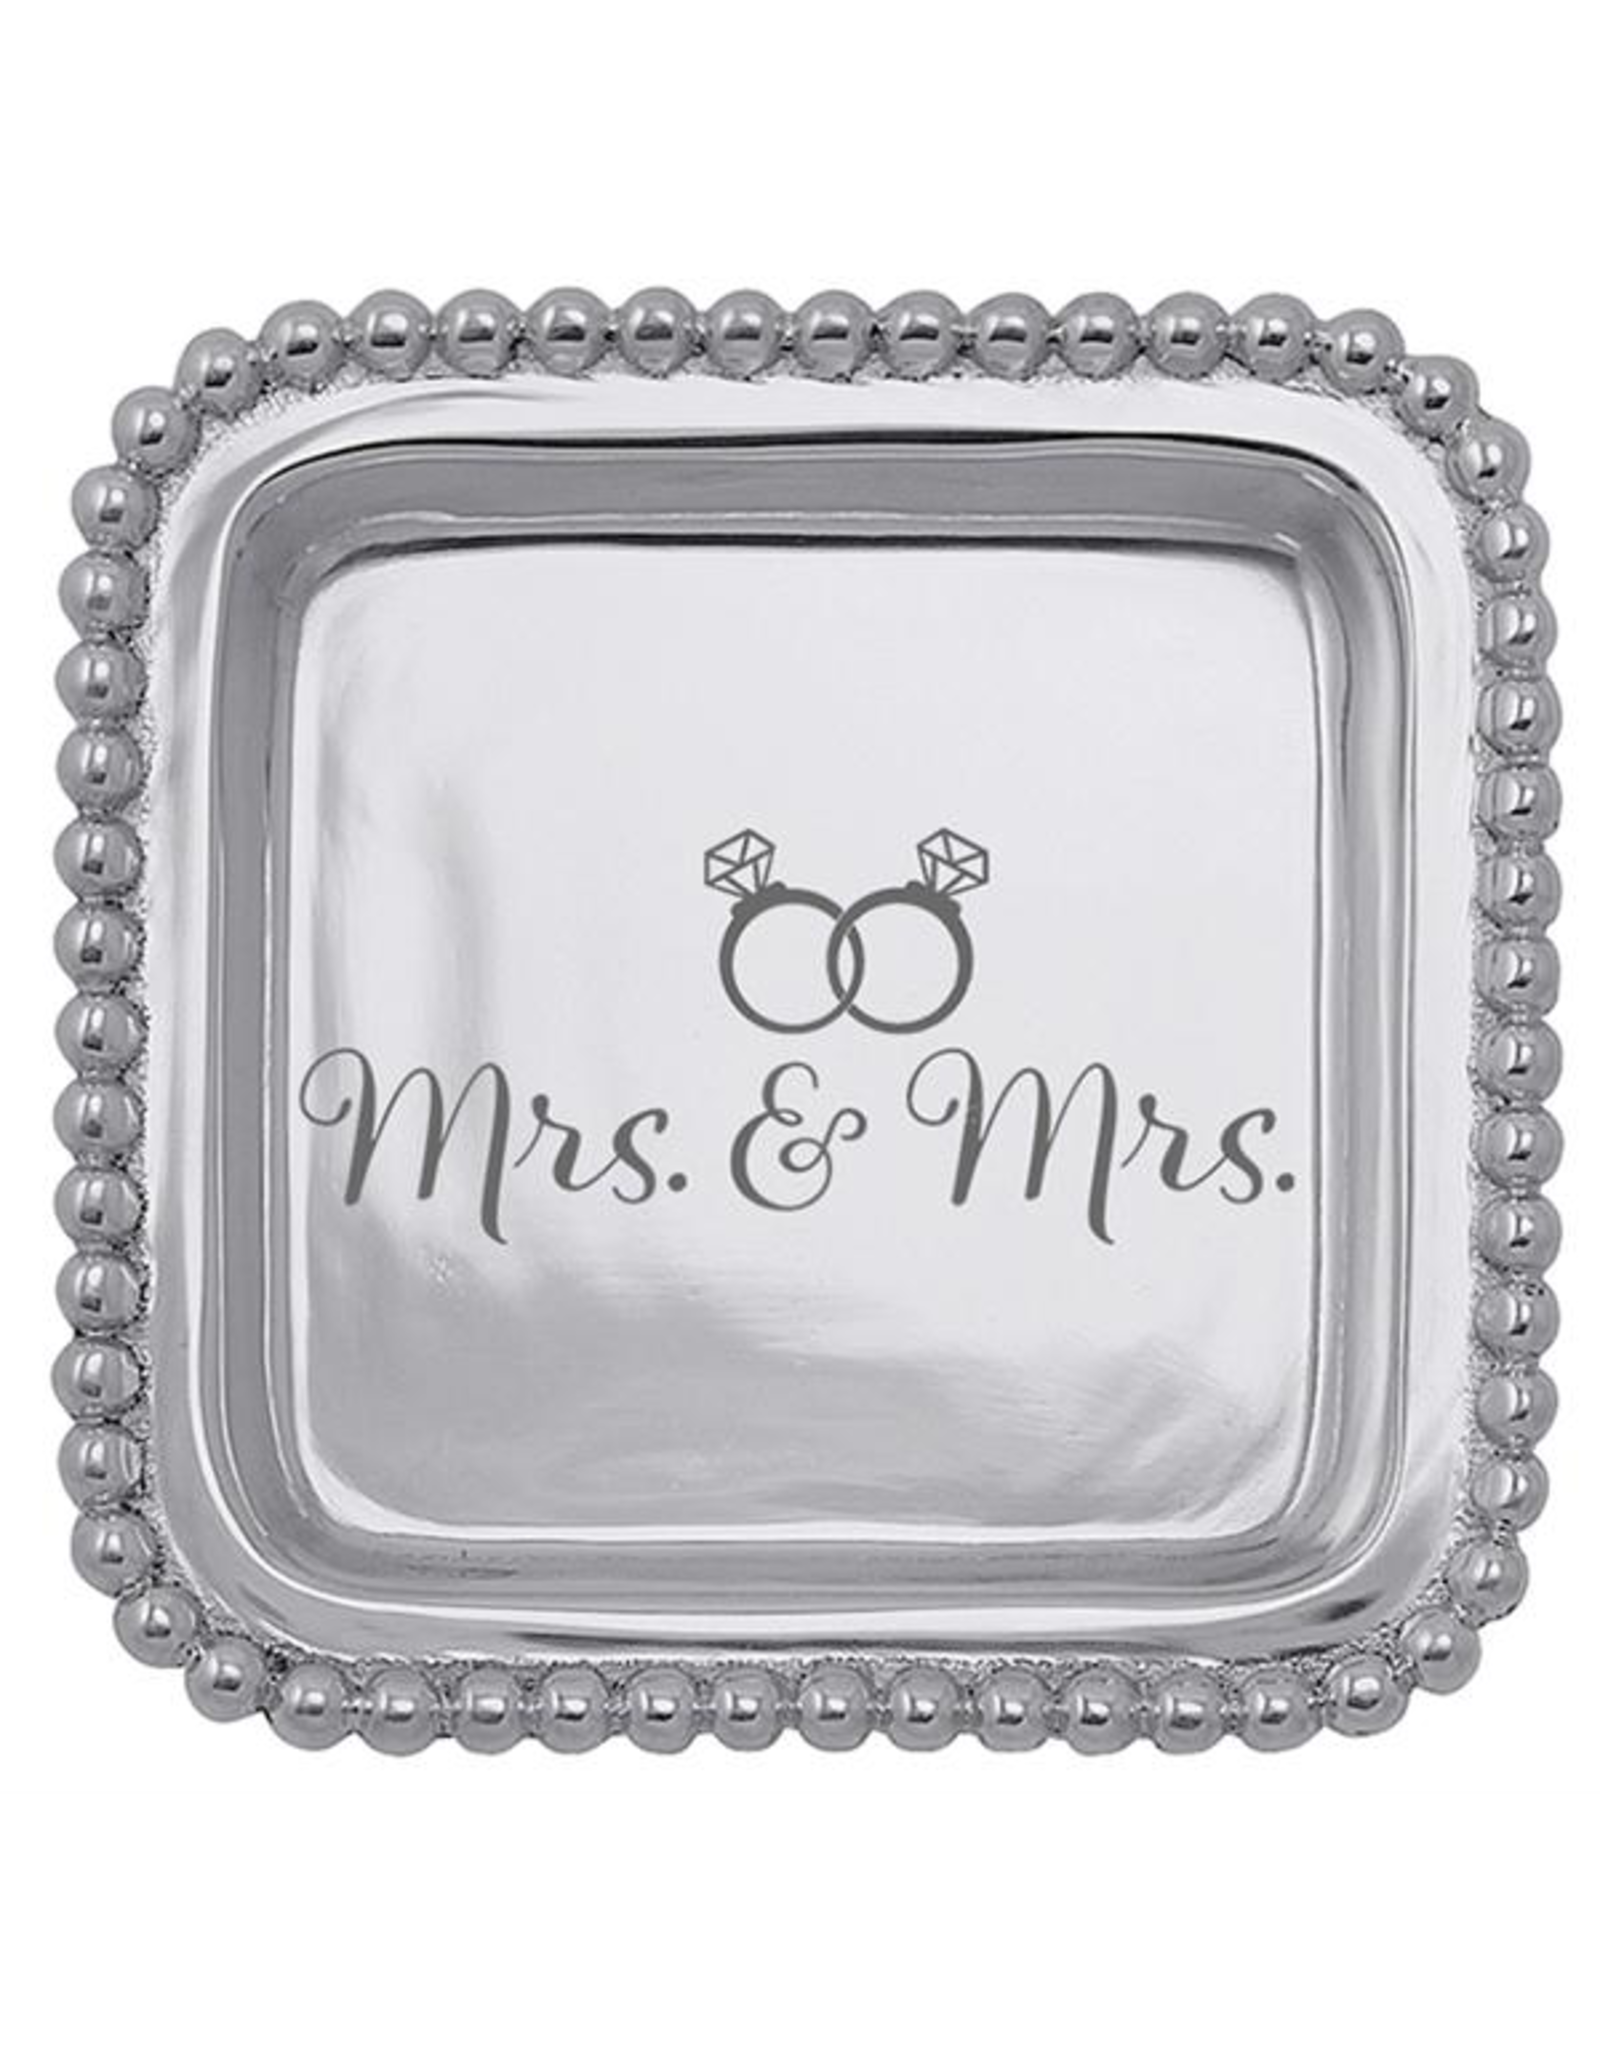 Mariposa Engraved Sentiment Tray Lesbian Wedding Gift Mrs and Mrs